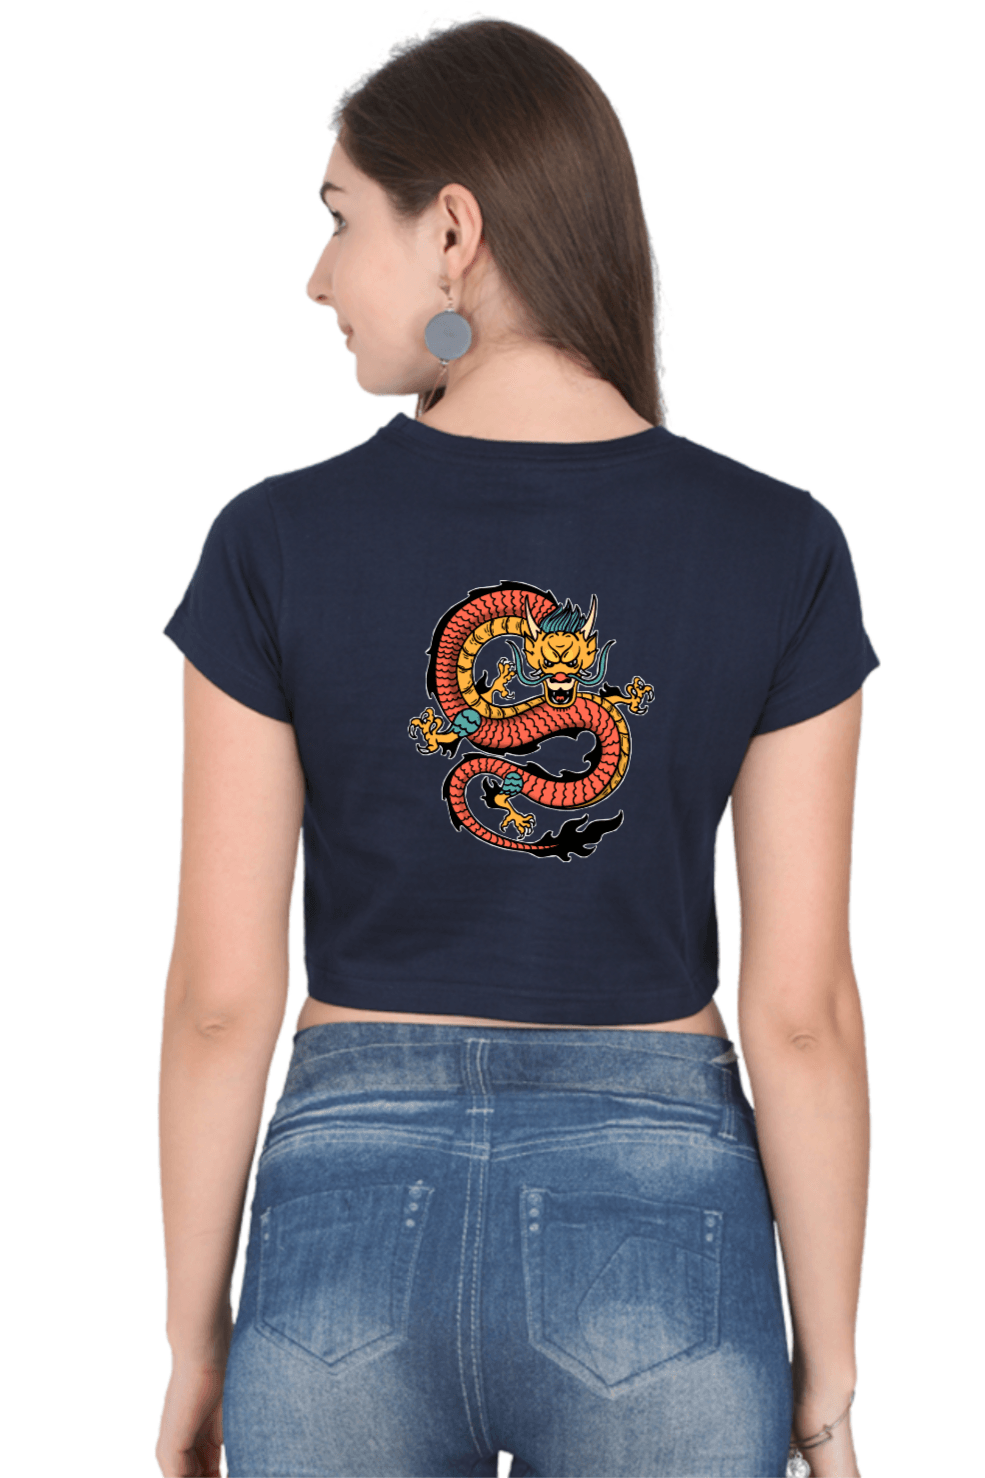 Navy Blue crop top with Dragon art print on the back